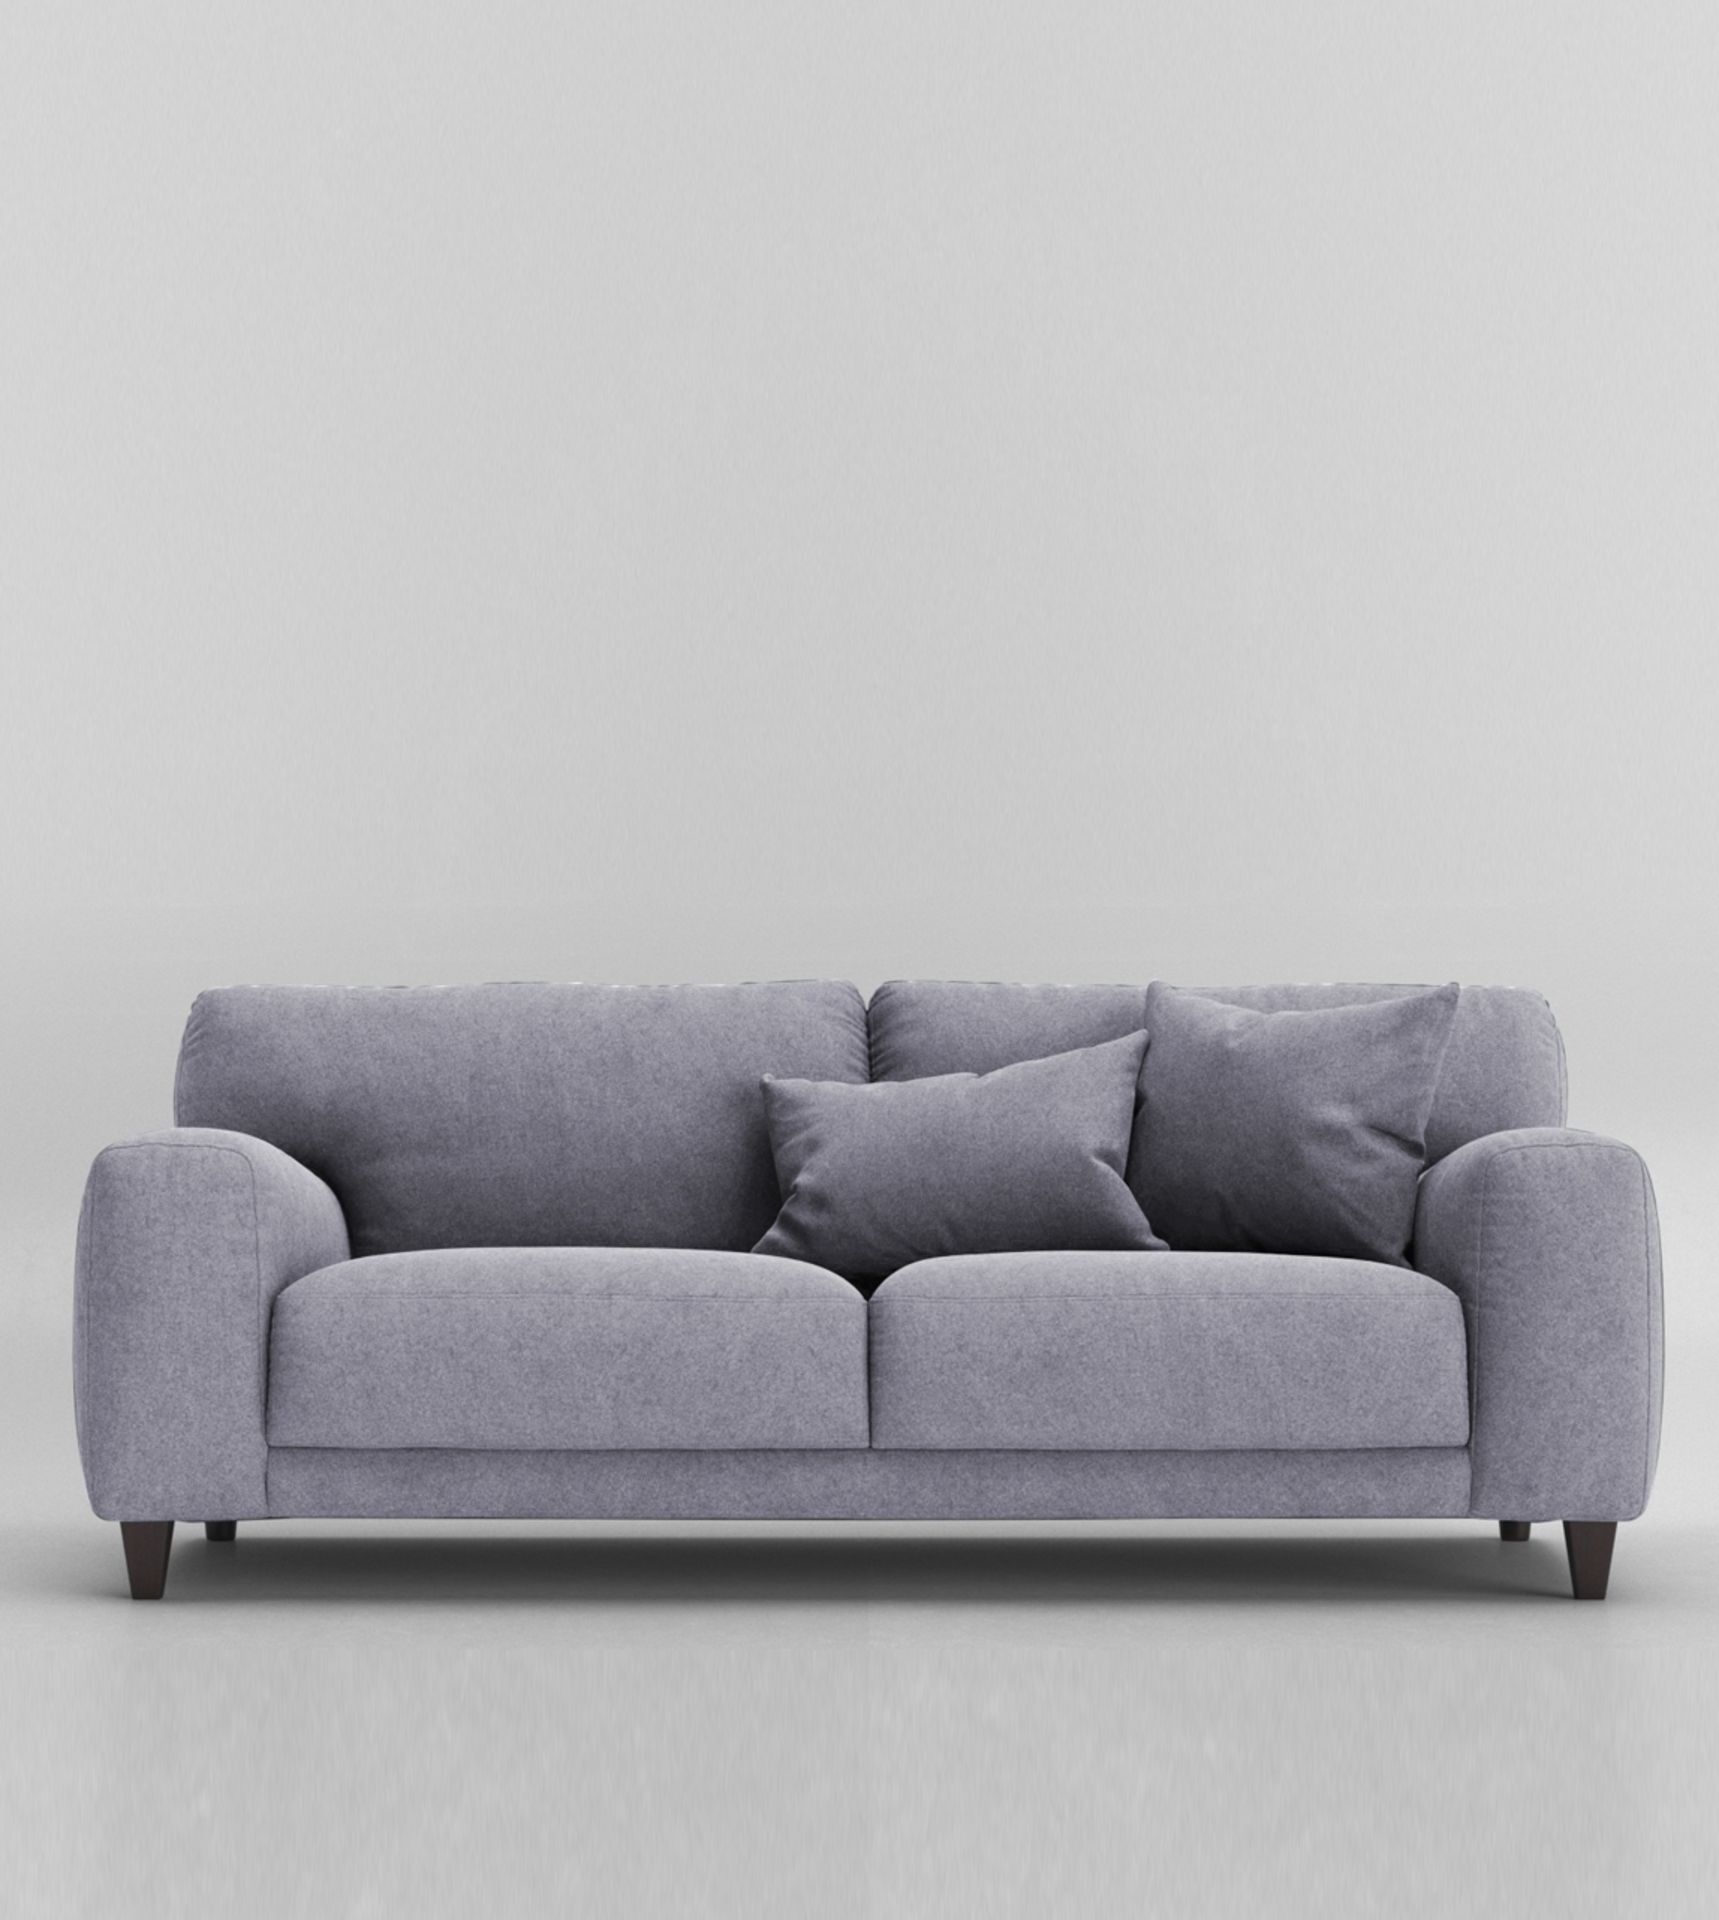 Swoon Edes House Weave Three-seater Sofa in Lilac Dark RRP ?1499.00 (Please note the stock photo